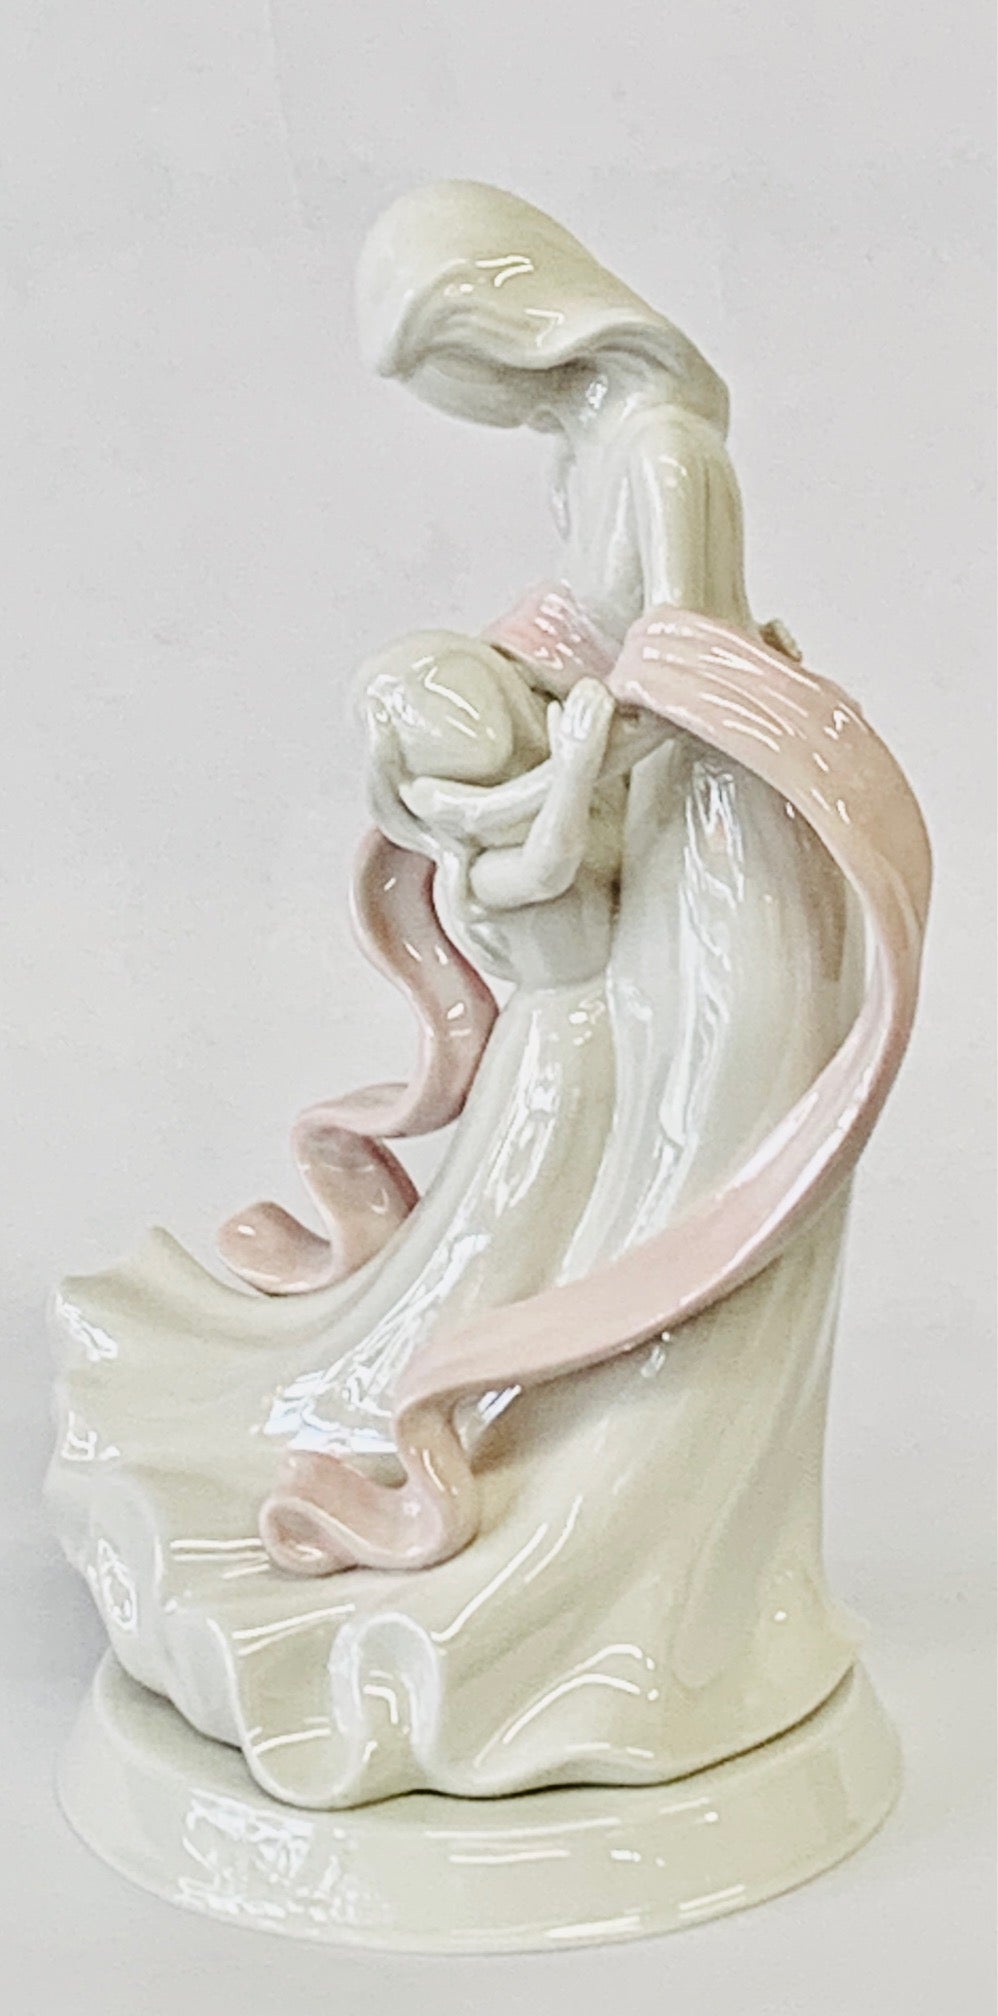 Mother & Daughter (Generations of Love) Porcelain Statue 4.5"wide X 4"deep X 8"tall - Royal Gift